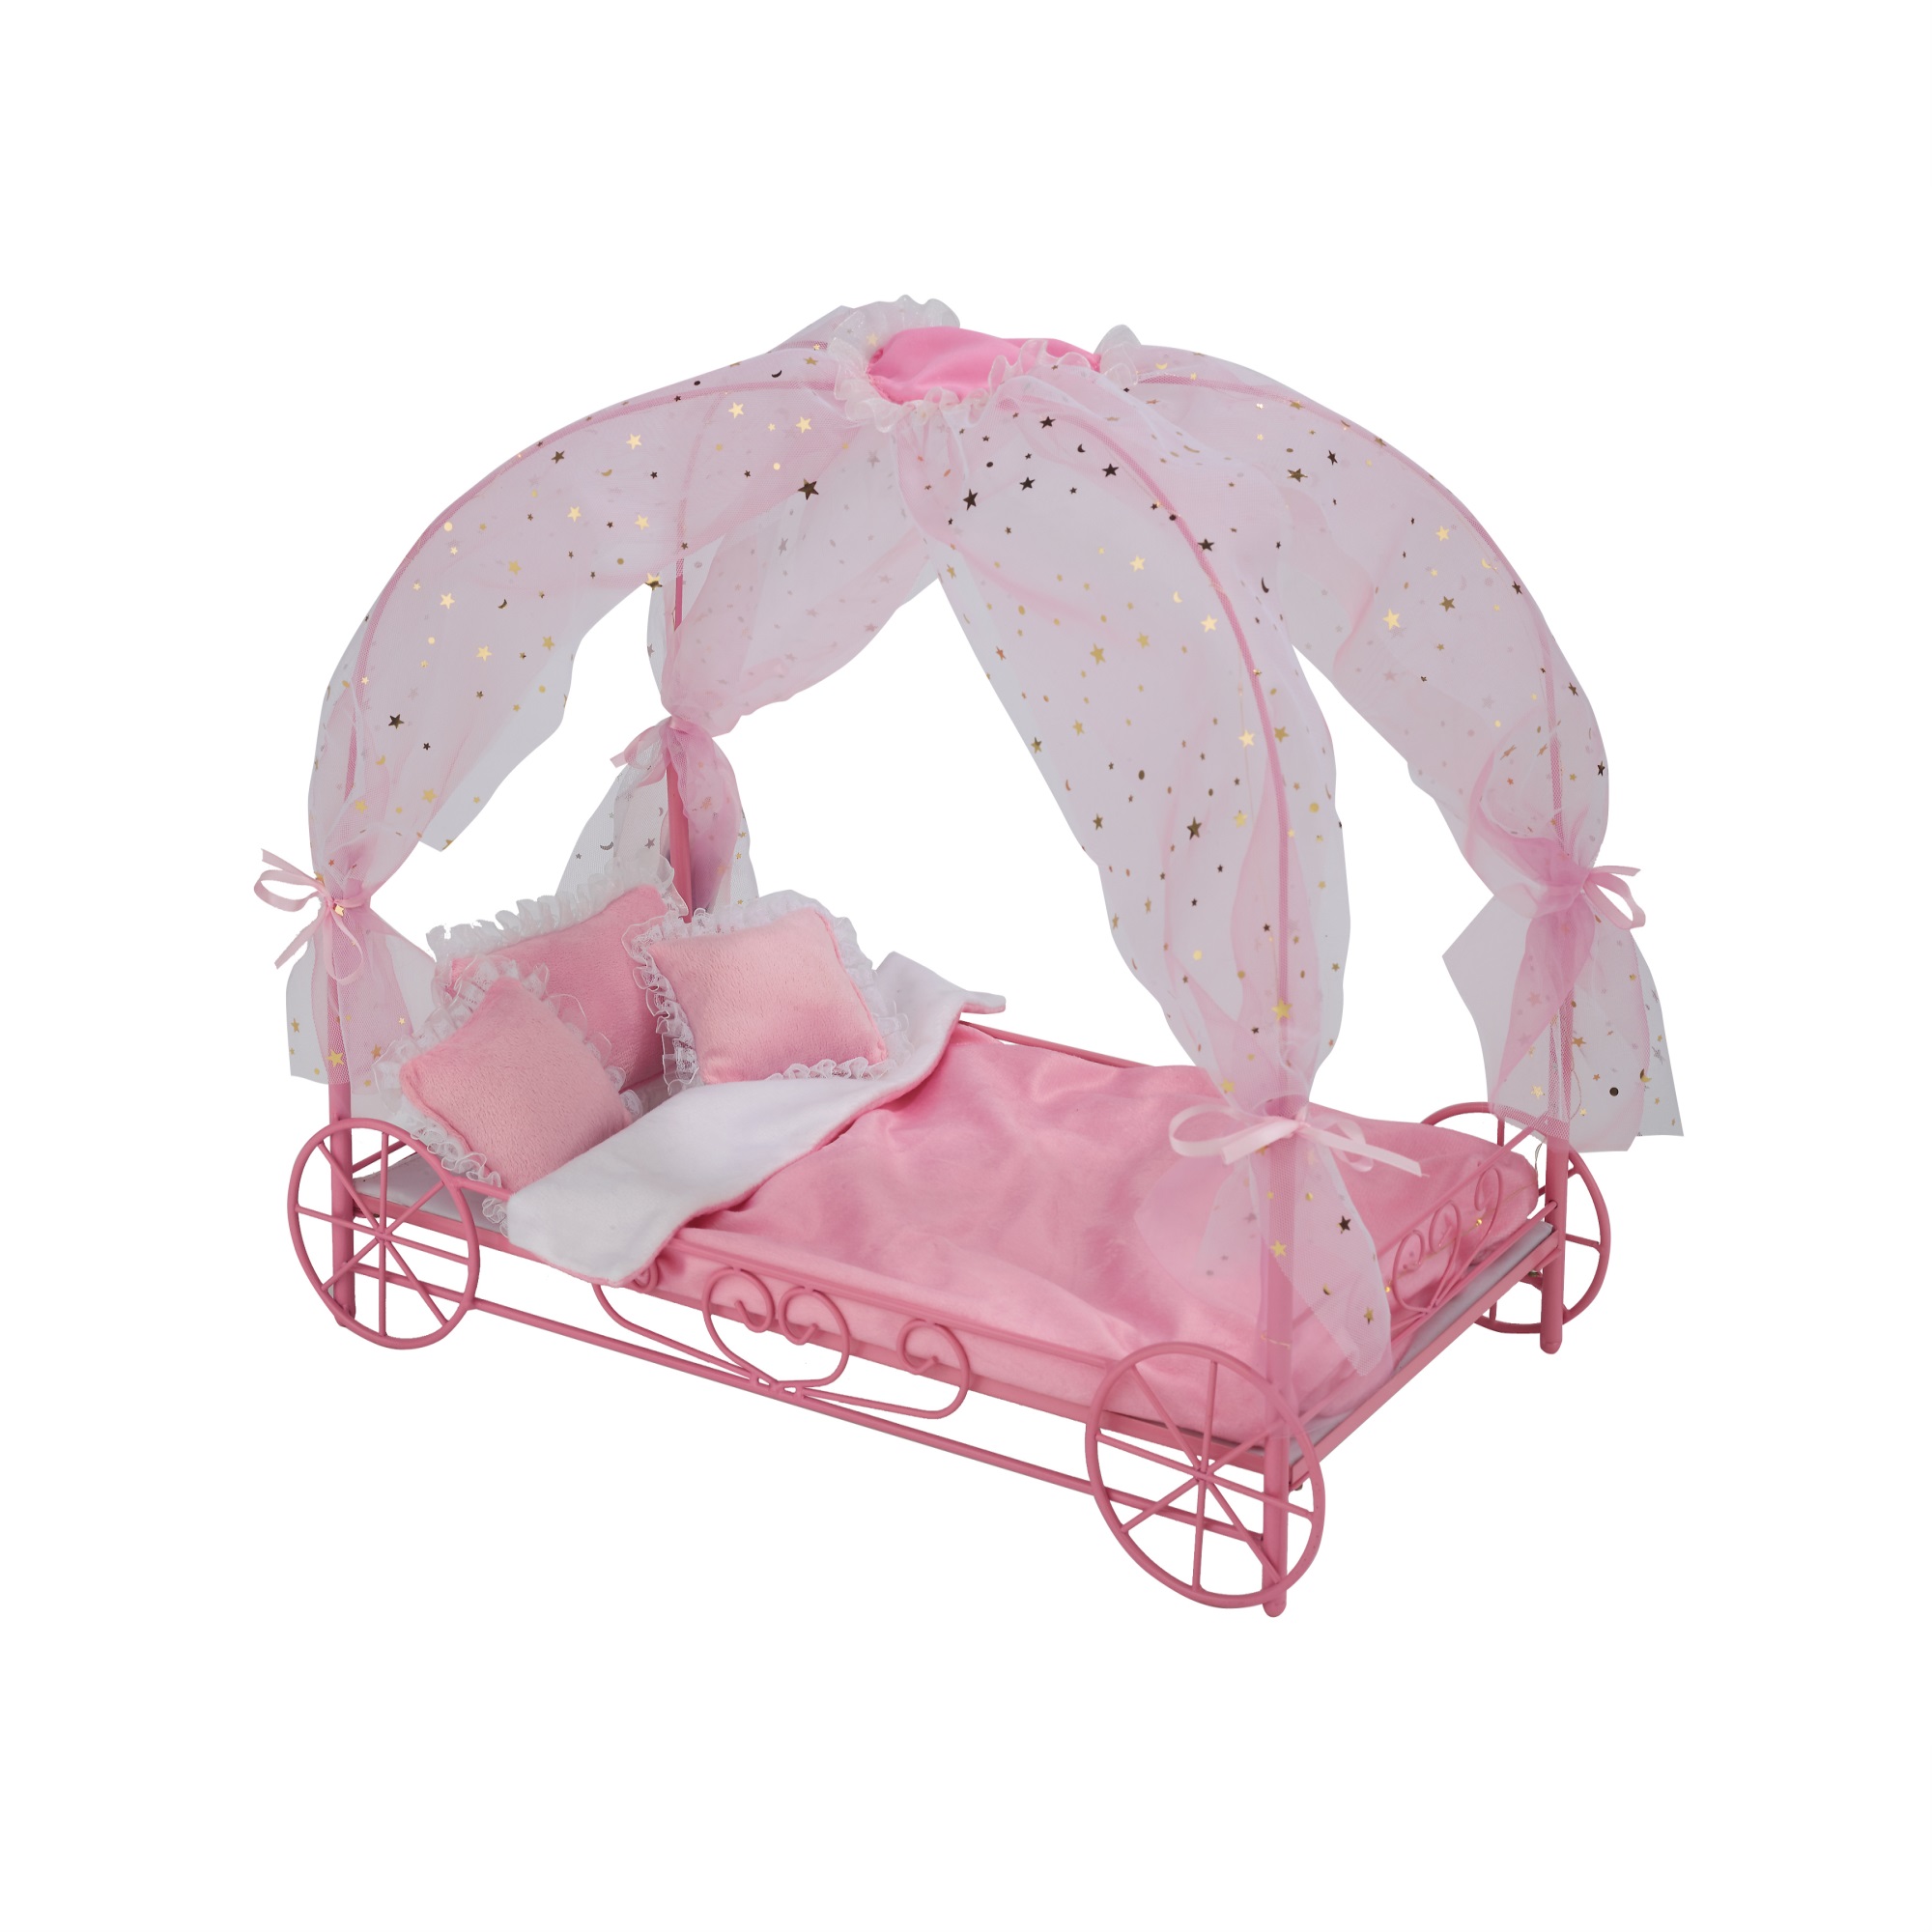 Badger Basket Royal Carriage Metal Doll Bed with Canopy, Bedding and LED Lights - Pink/White/Stars